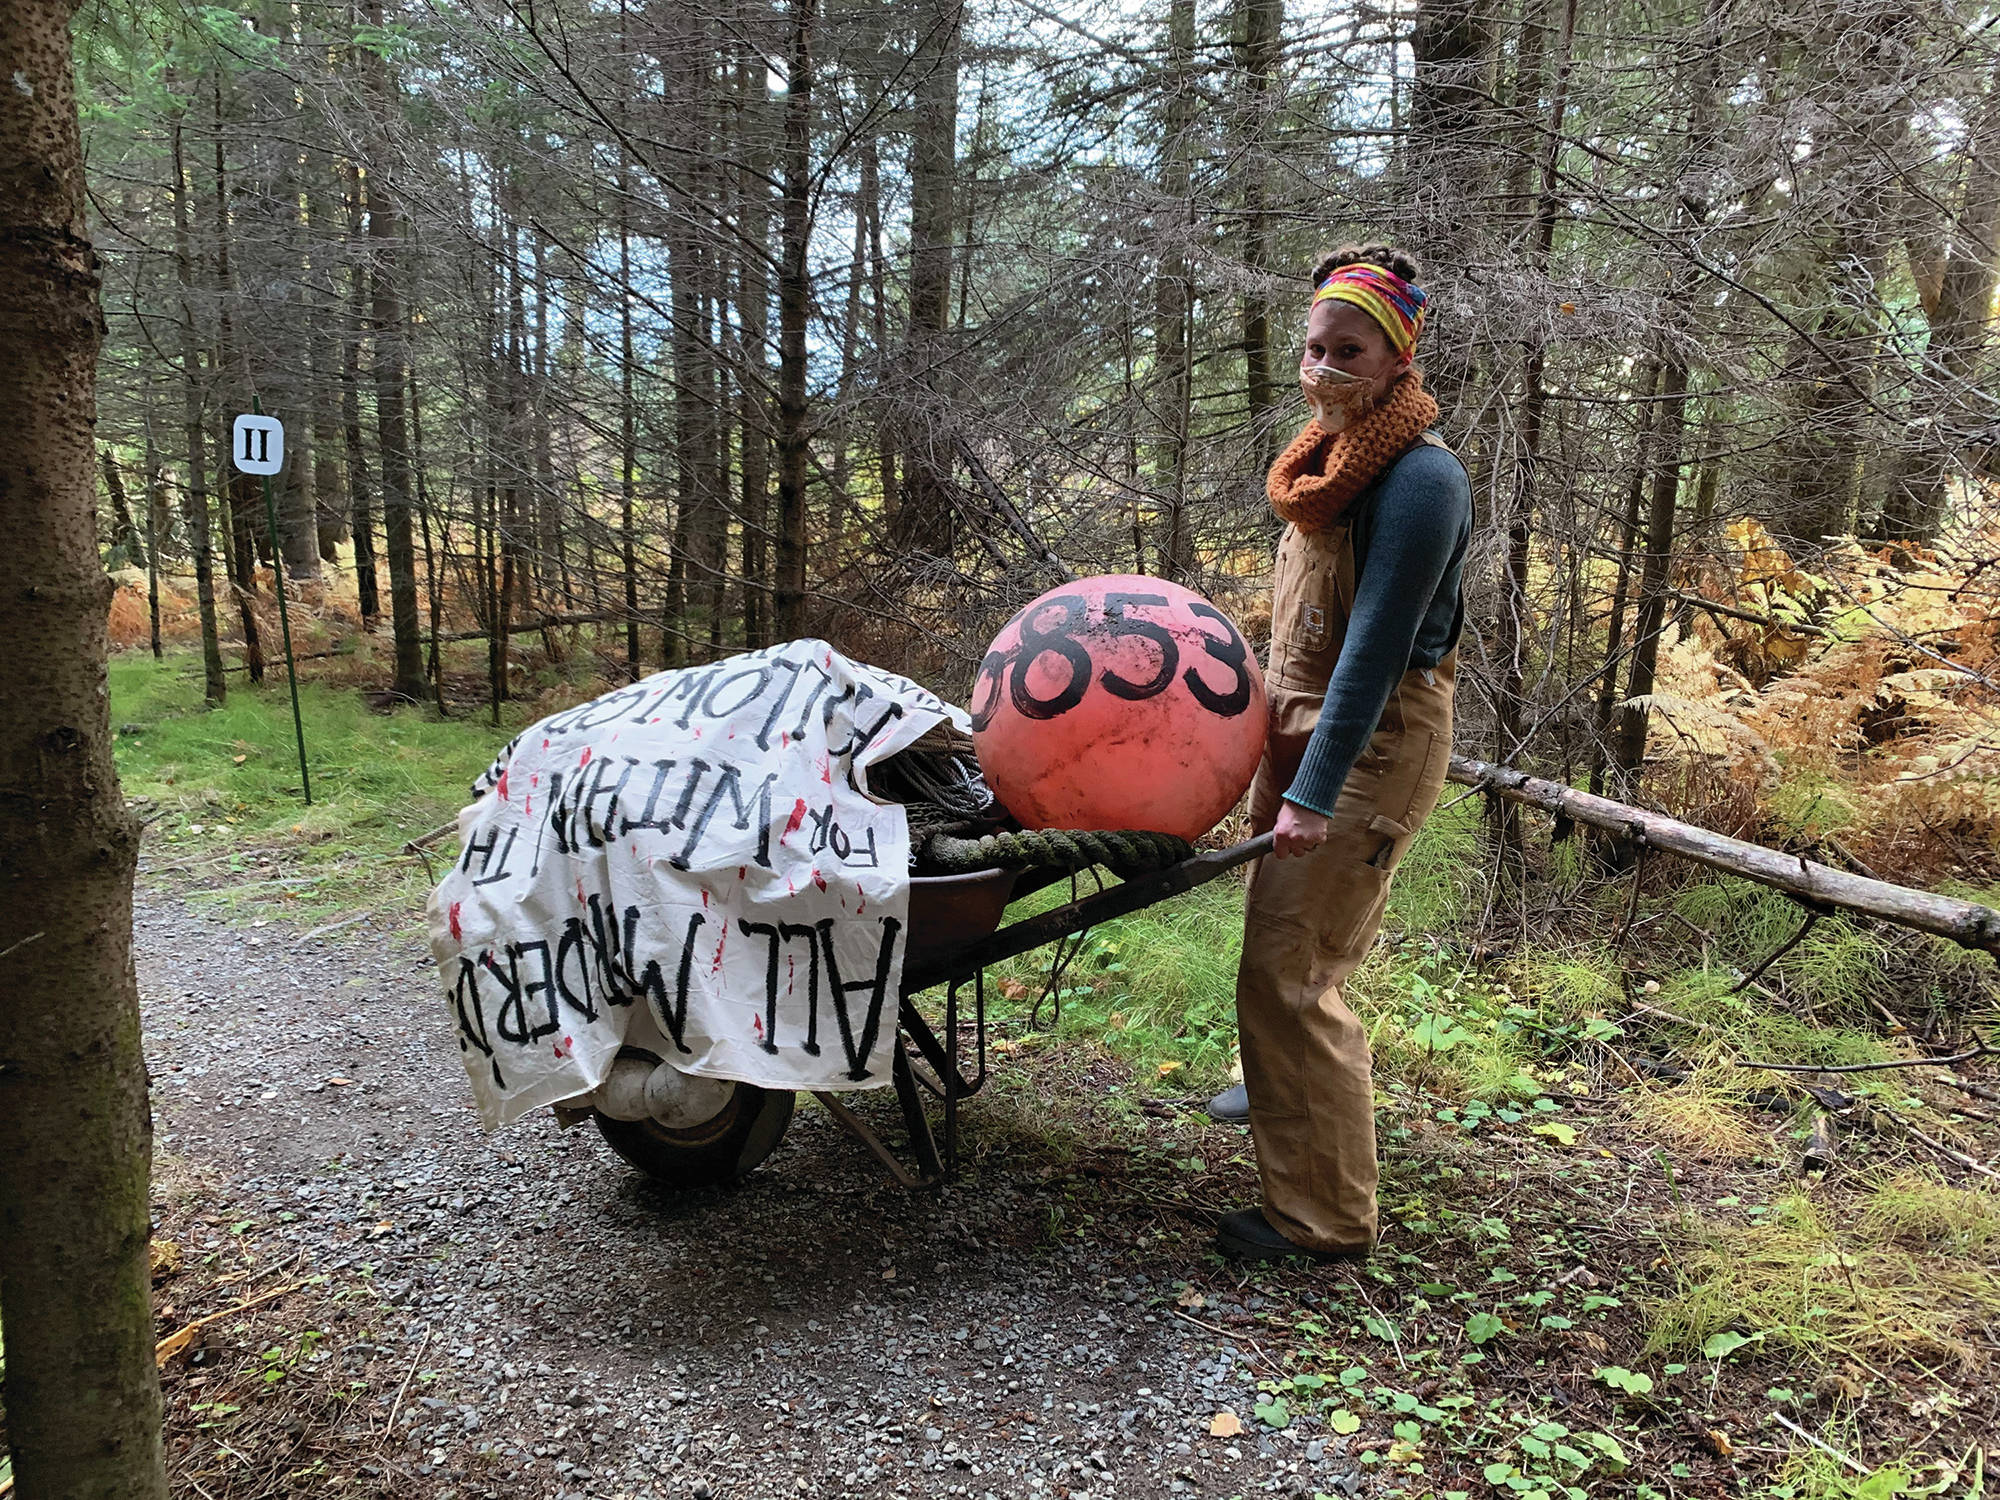 Sarah Brewer moves some props for “Haunted Shakespeare” in a photo taken Oct. 12, 2020, at the Pratt Museum forest trail in Homer, Alaska. Brewer is the curator and director of the evening of theater. (Photo courtesy Pier One Theatre)